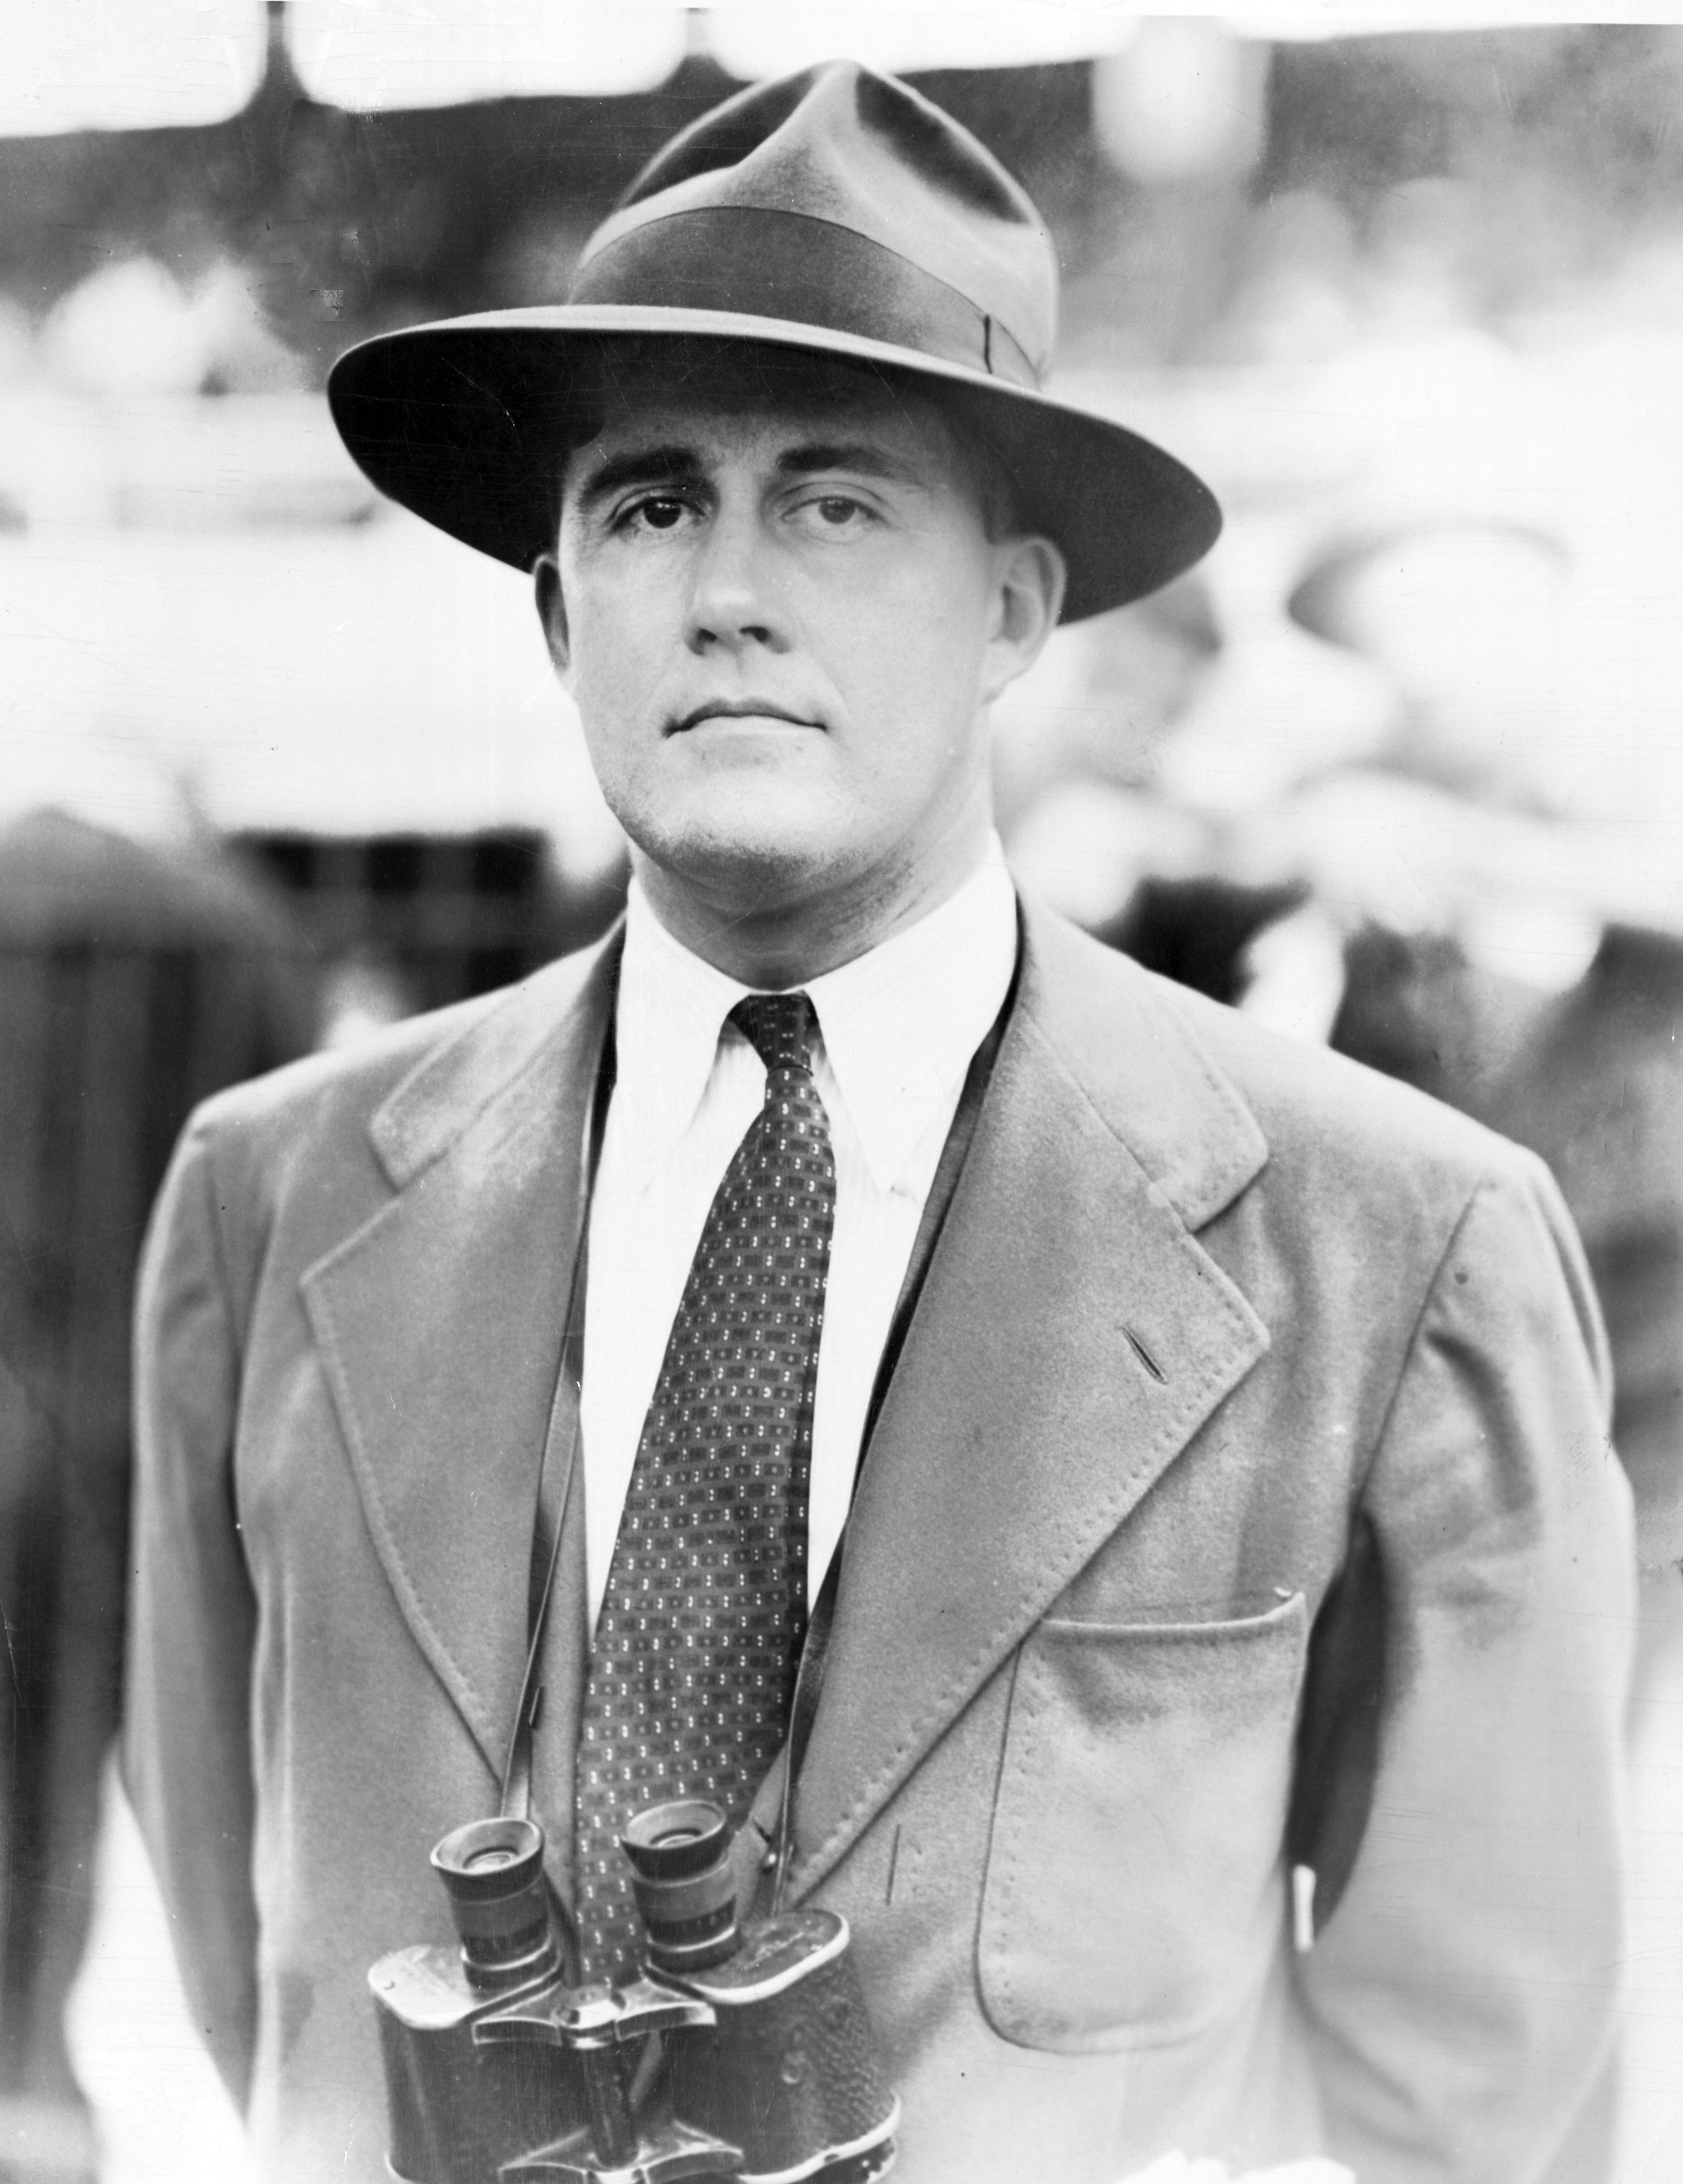 J. Keene Daingerfield, Jr. (Keeneland Library Thoroughbred Times Collection)